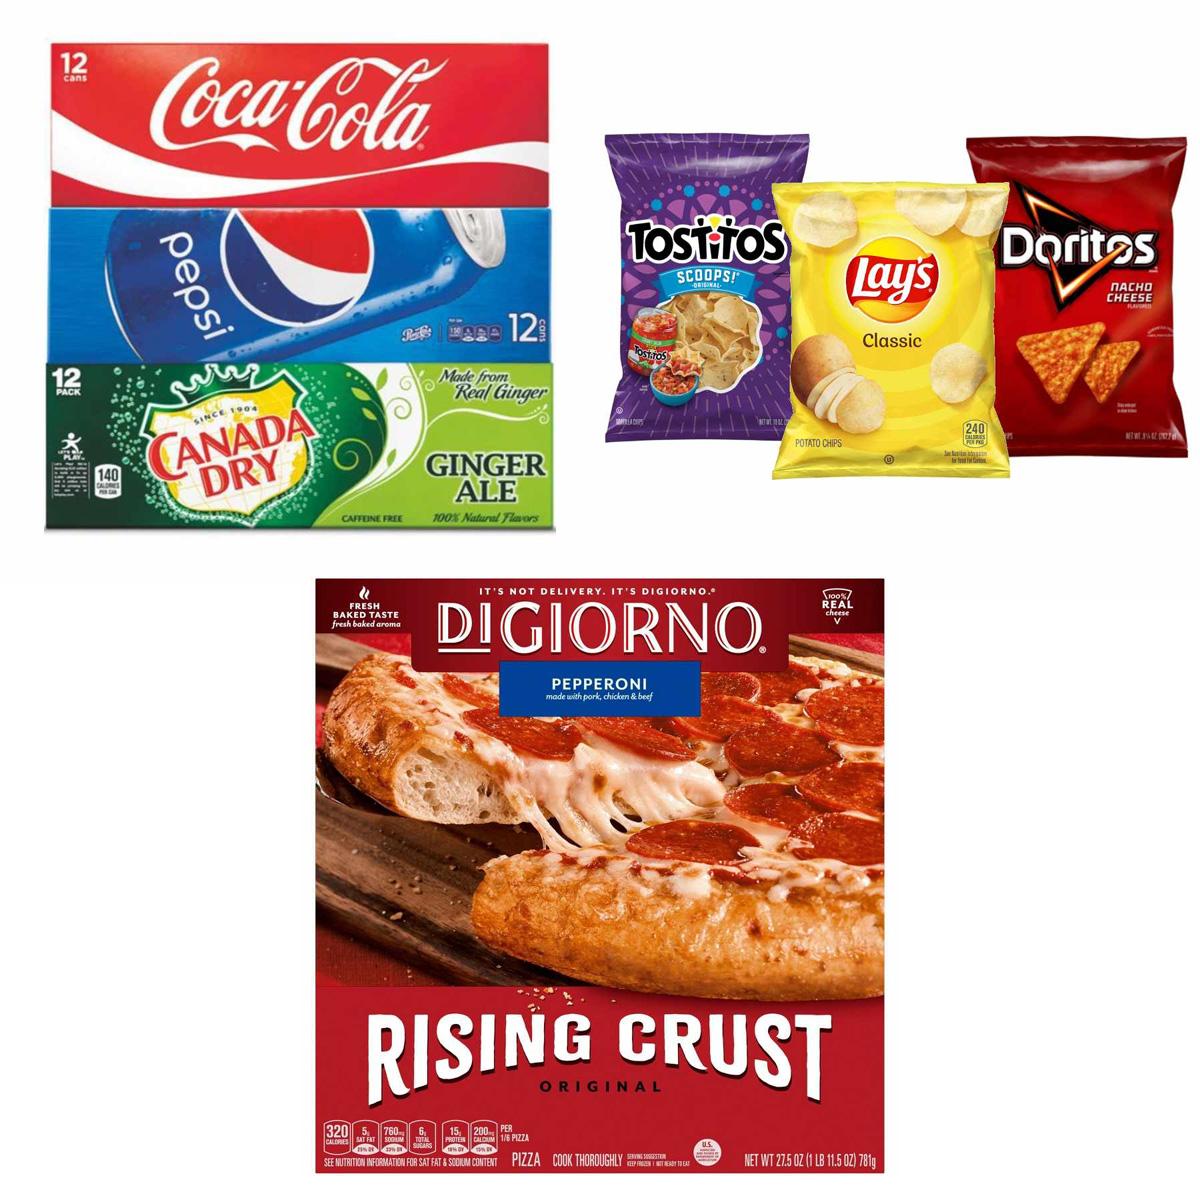 Target Sodas Chips and Pizza for 35% Off